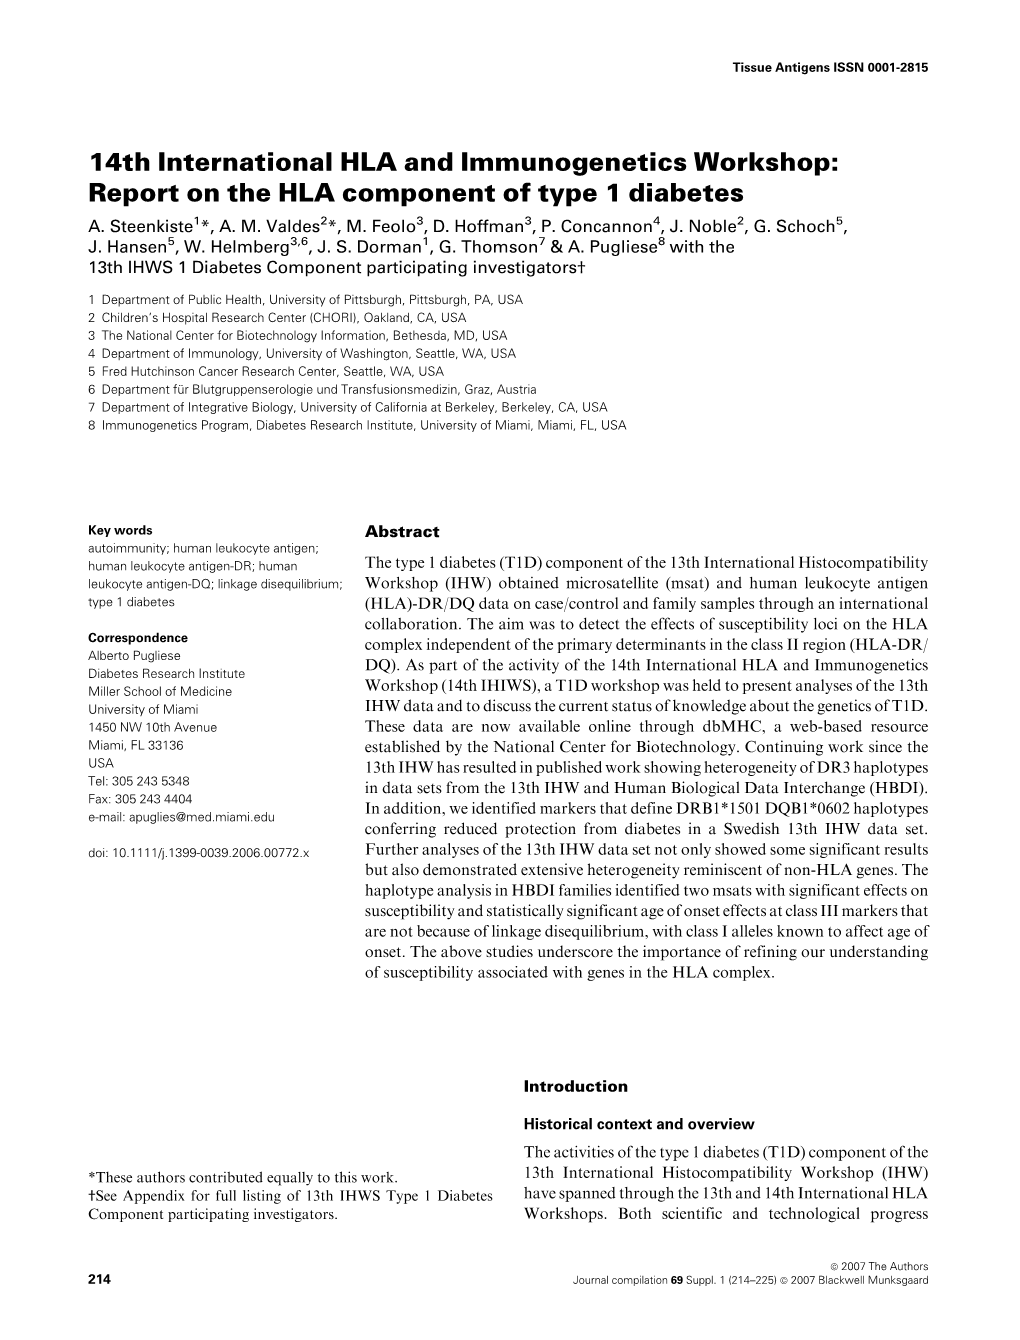 14Th International HLA and Immunogenetics Workshop: Report on the HLA Component of Type 1 Diabetes A